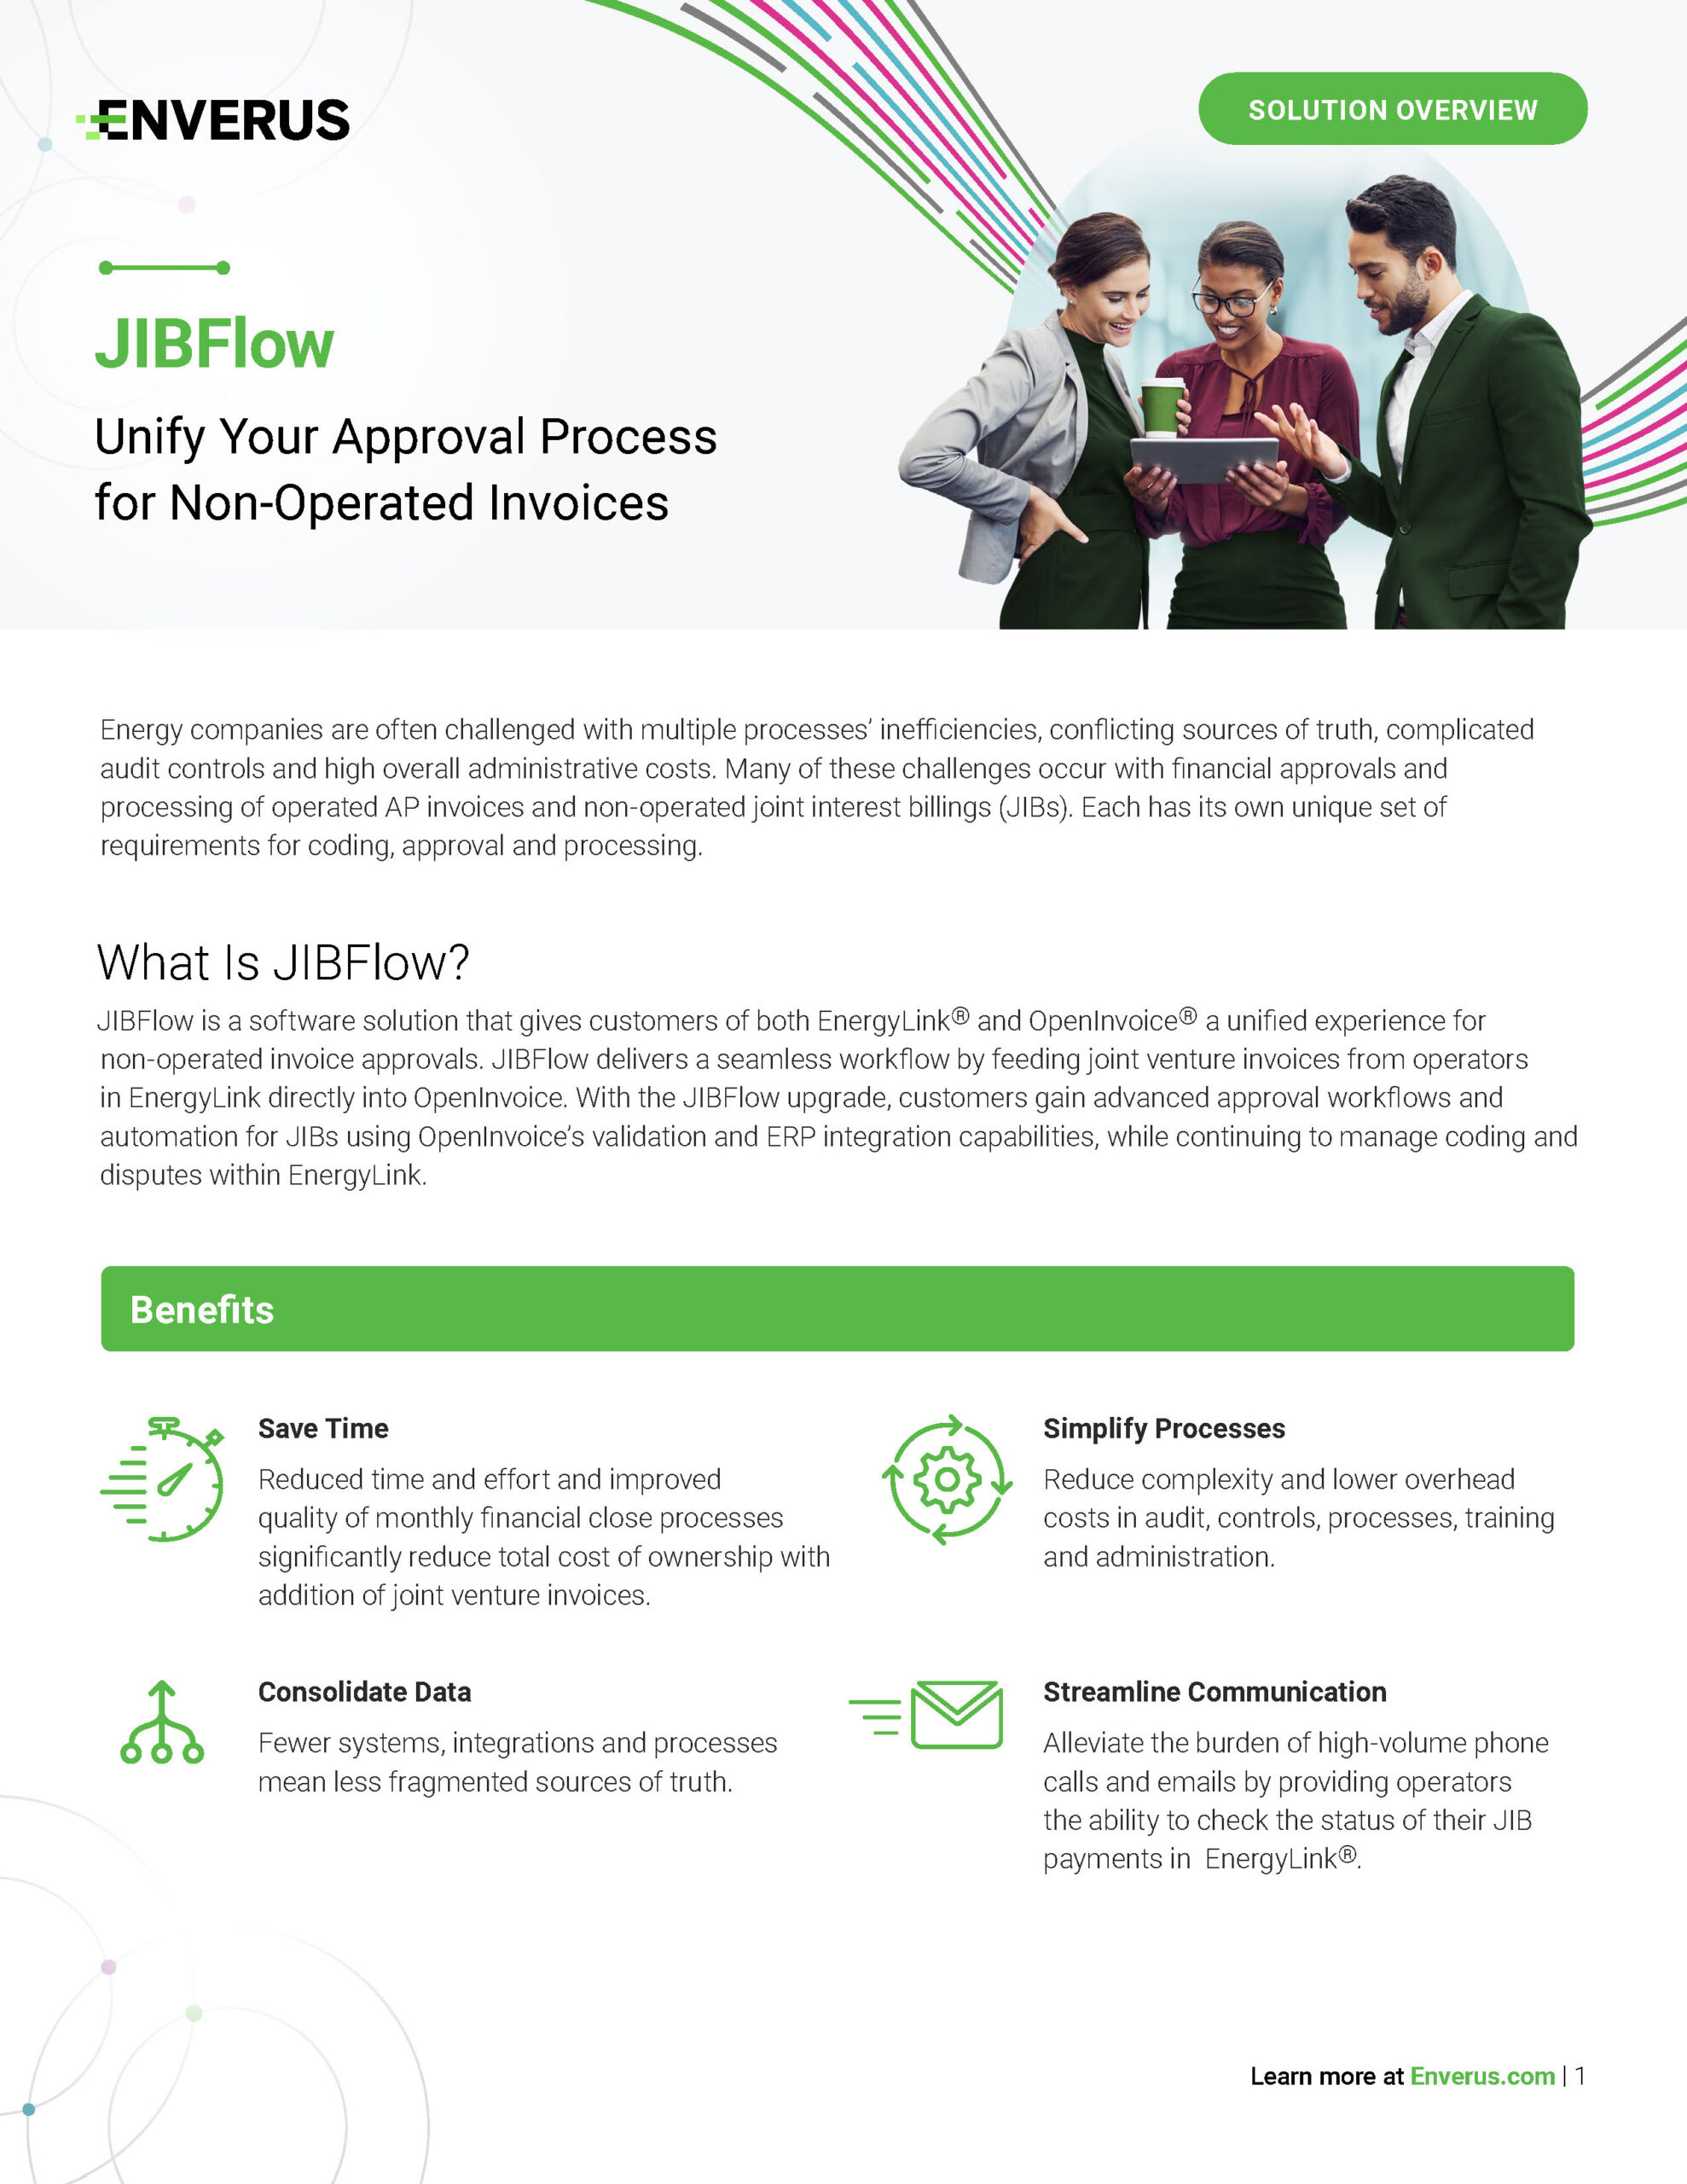 jibflow-solution-overview